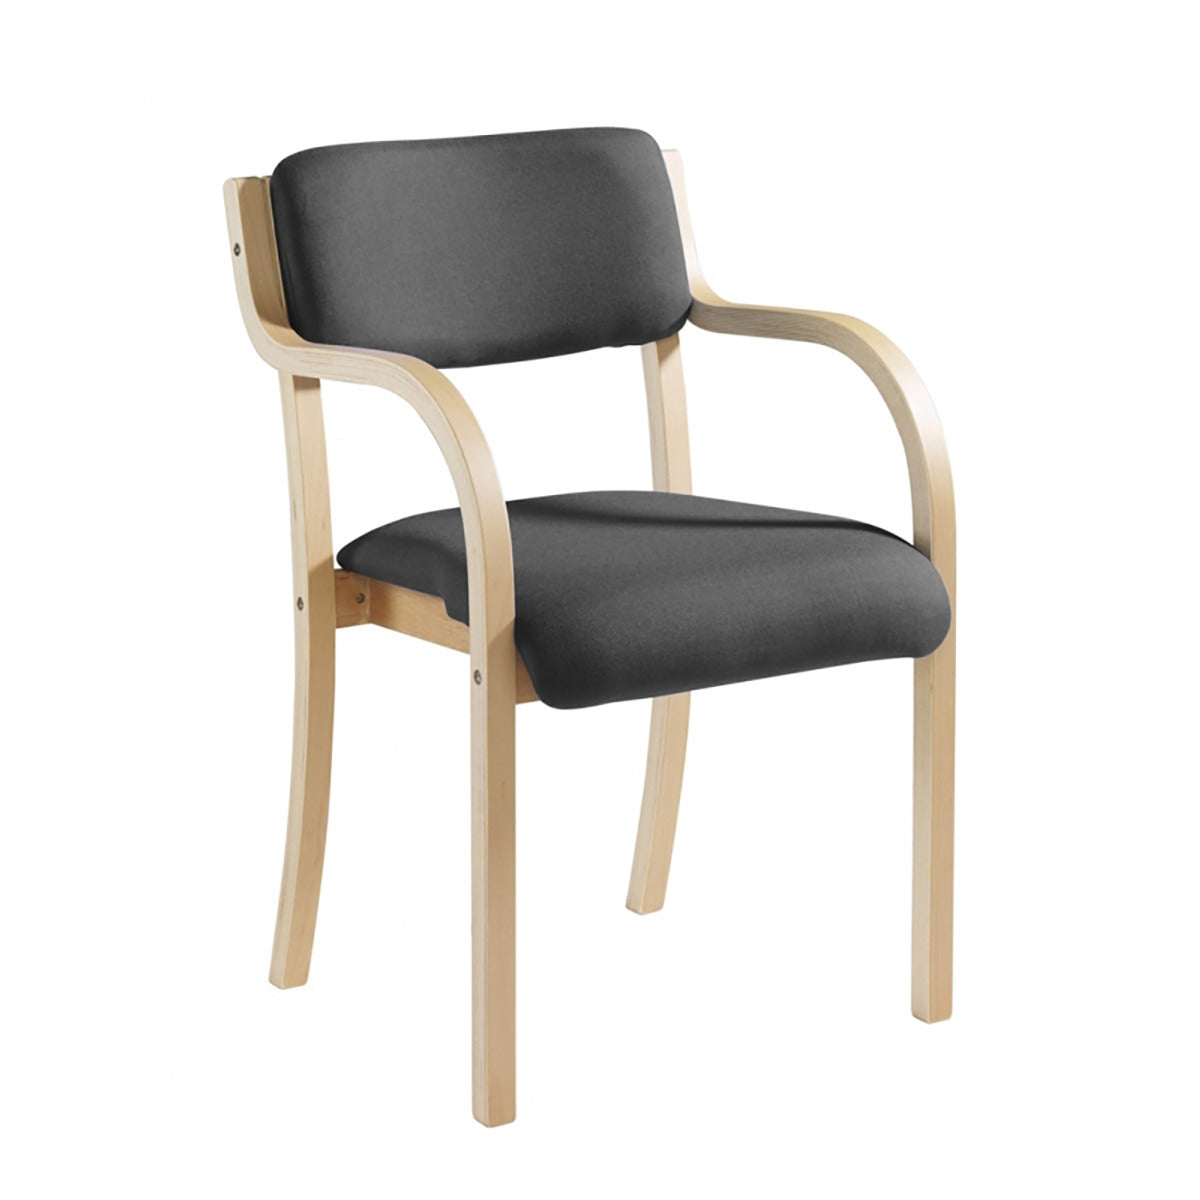 Prague Wood Frame Conference Chair with Optional Arms - Charcoal or Blue Colour Option